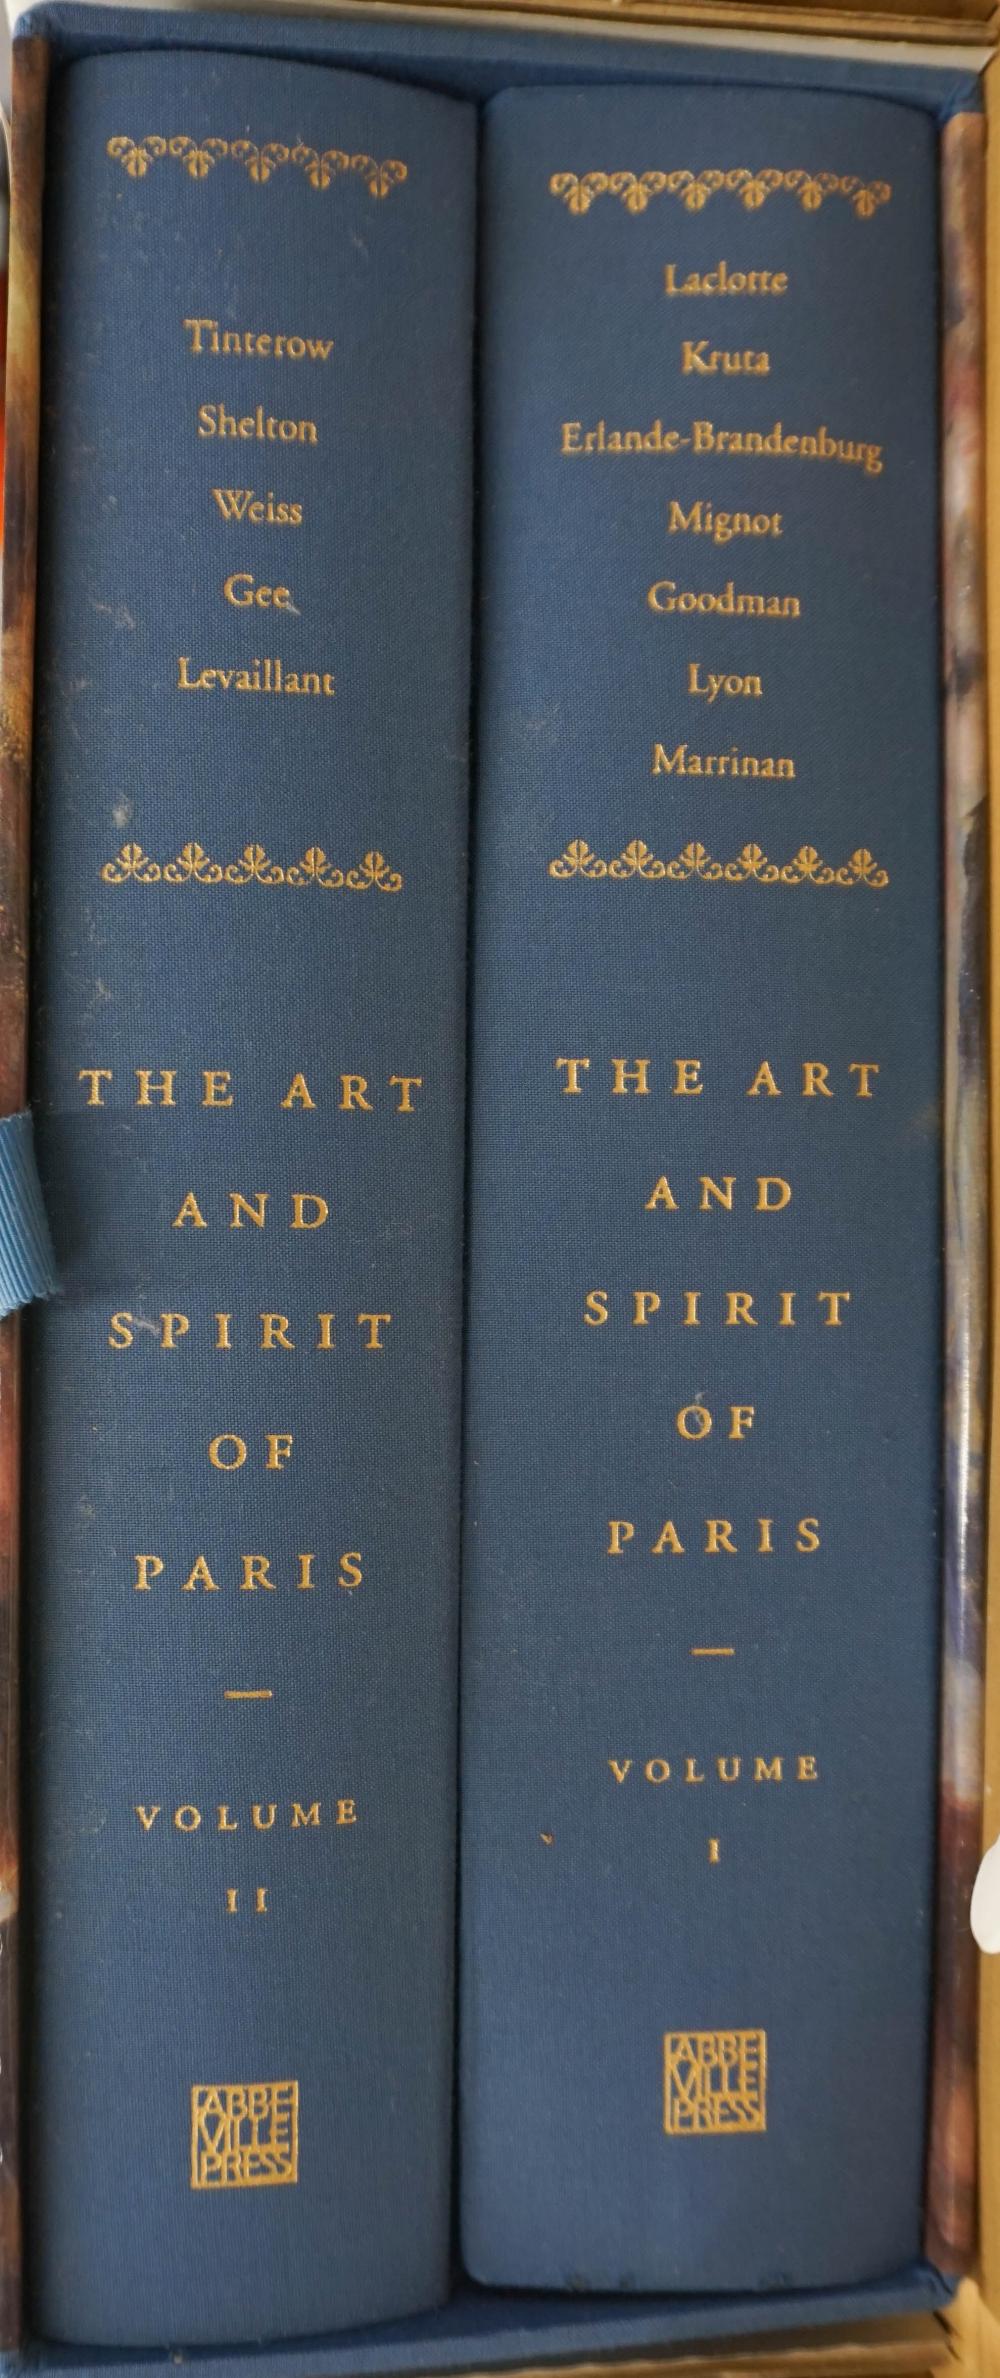 THE ART AND SPIRIT OF PARIS TWO 2e80ad